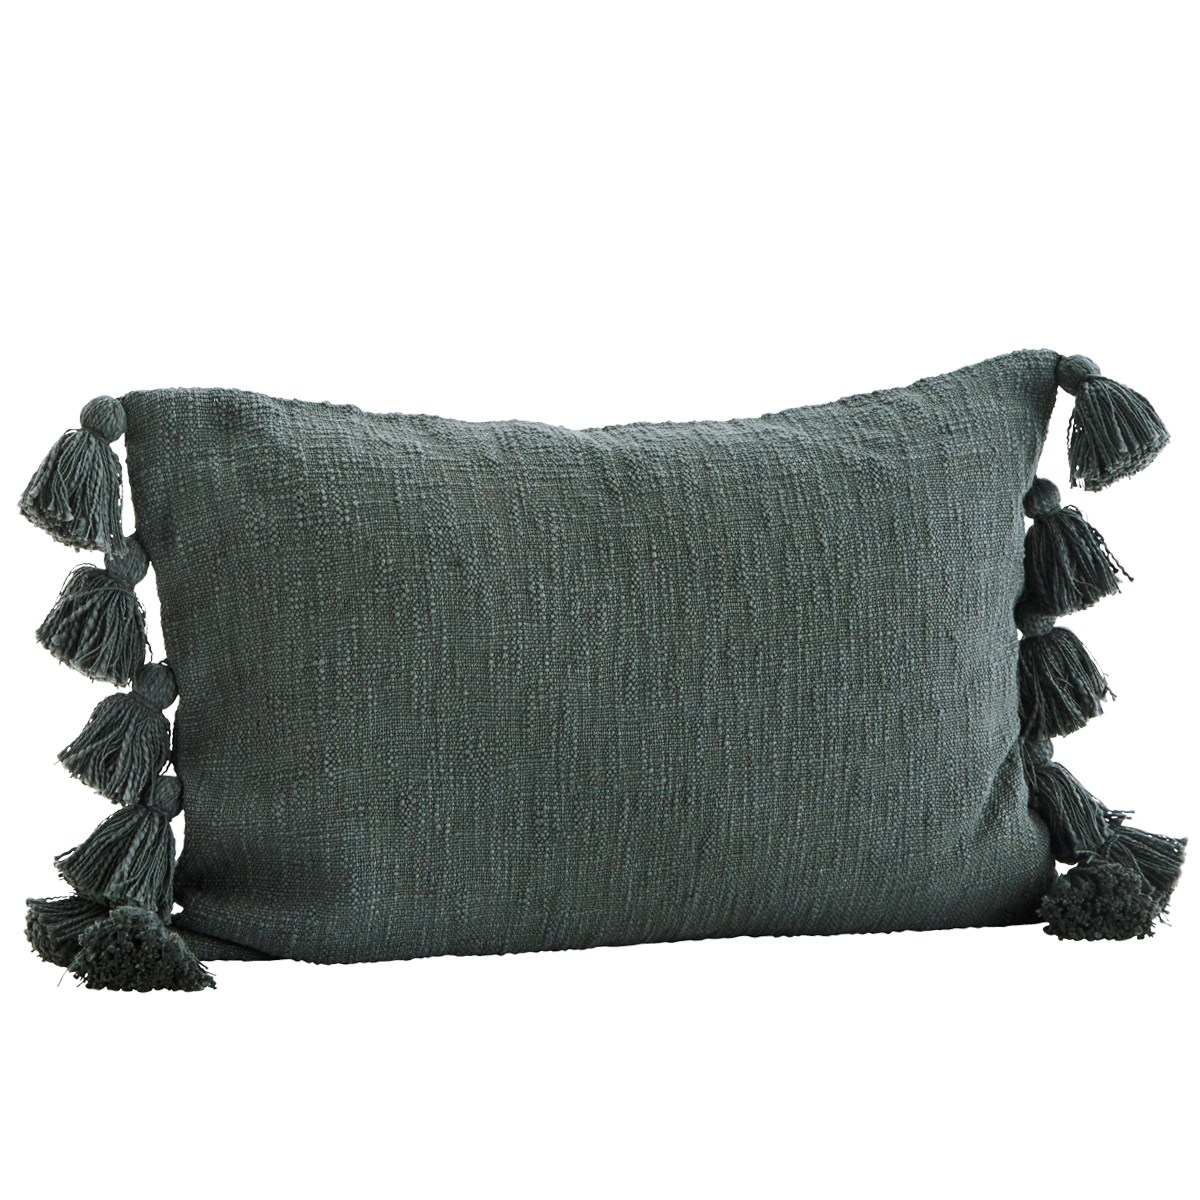 Cushion Cover With Tassels 40x60 cm, Ivy